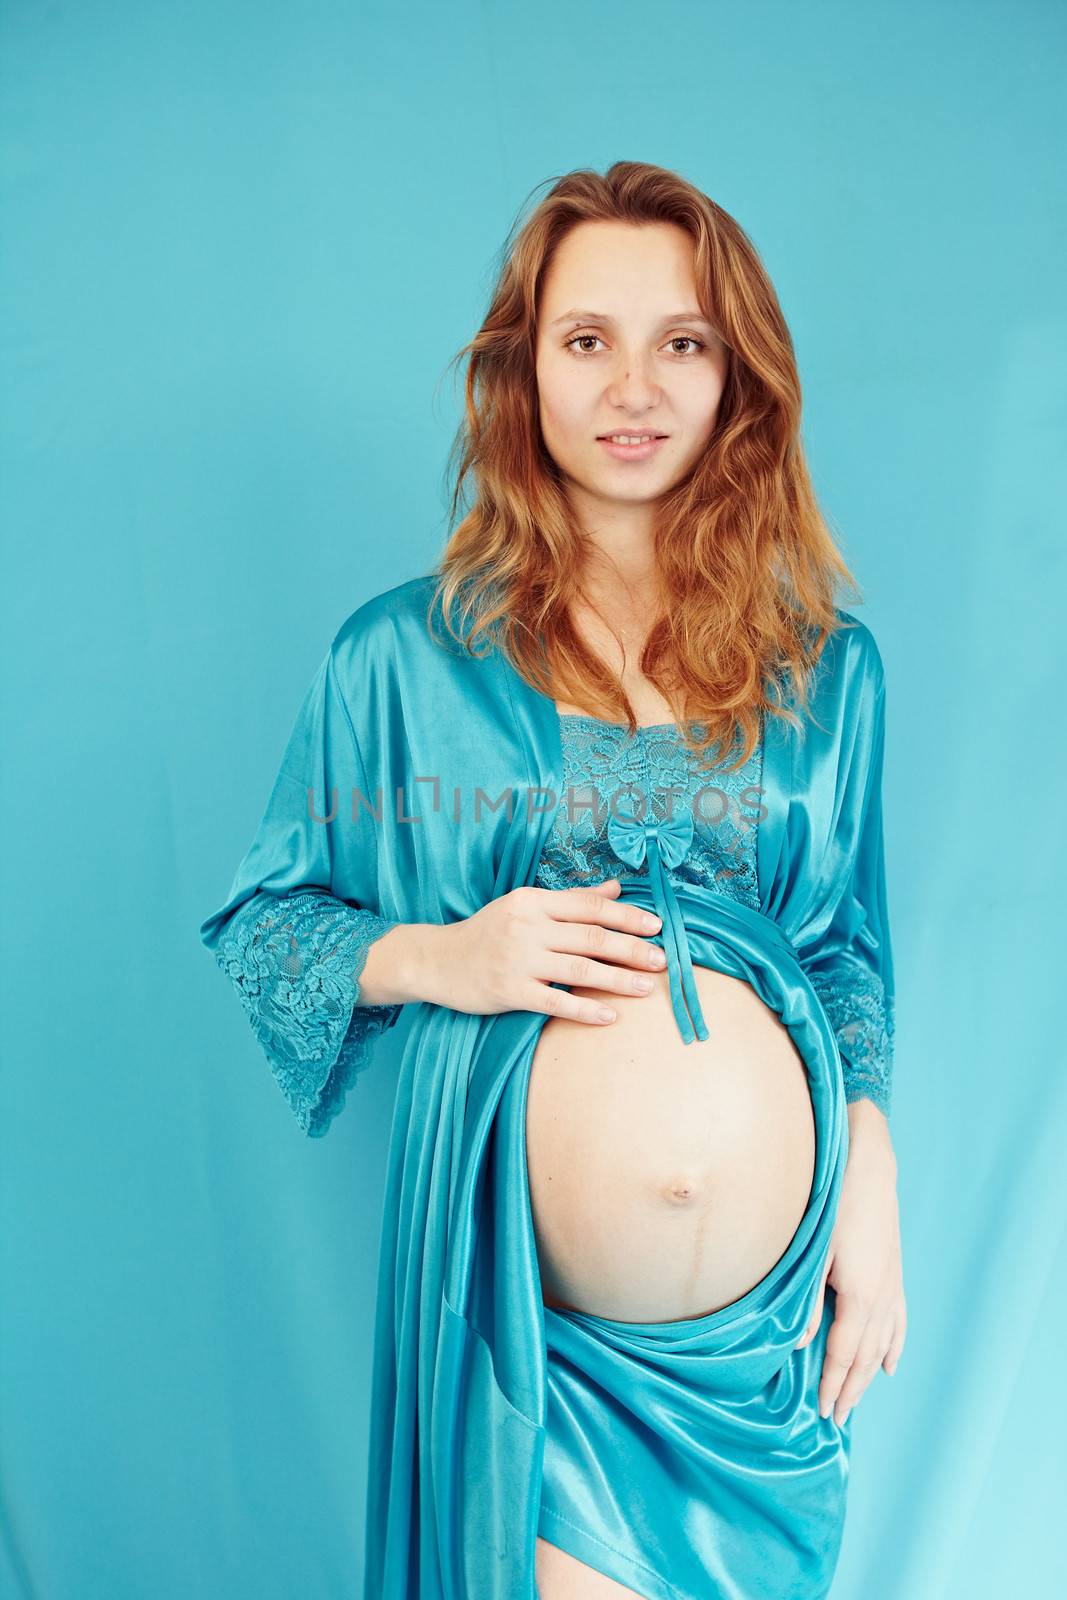 Pregnant woman on a turquoise background